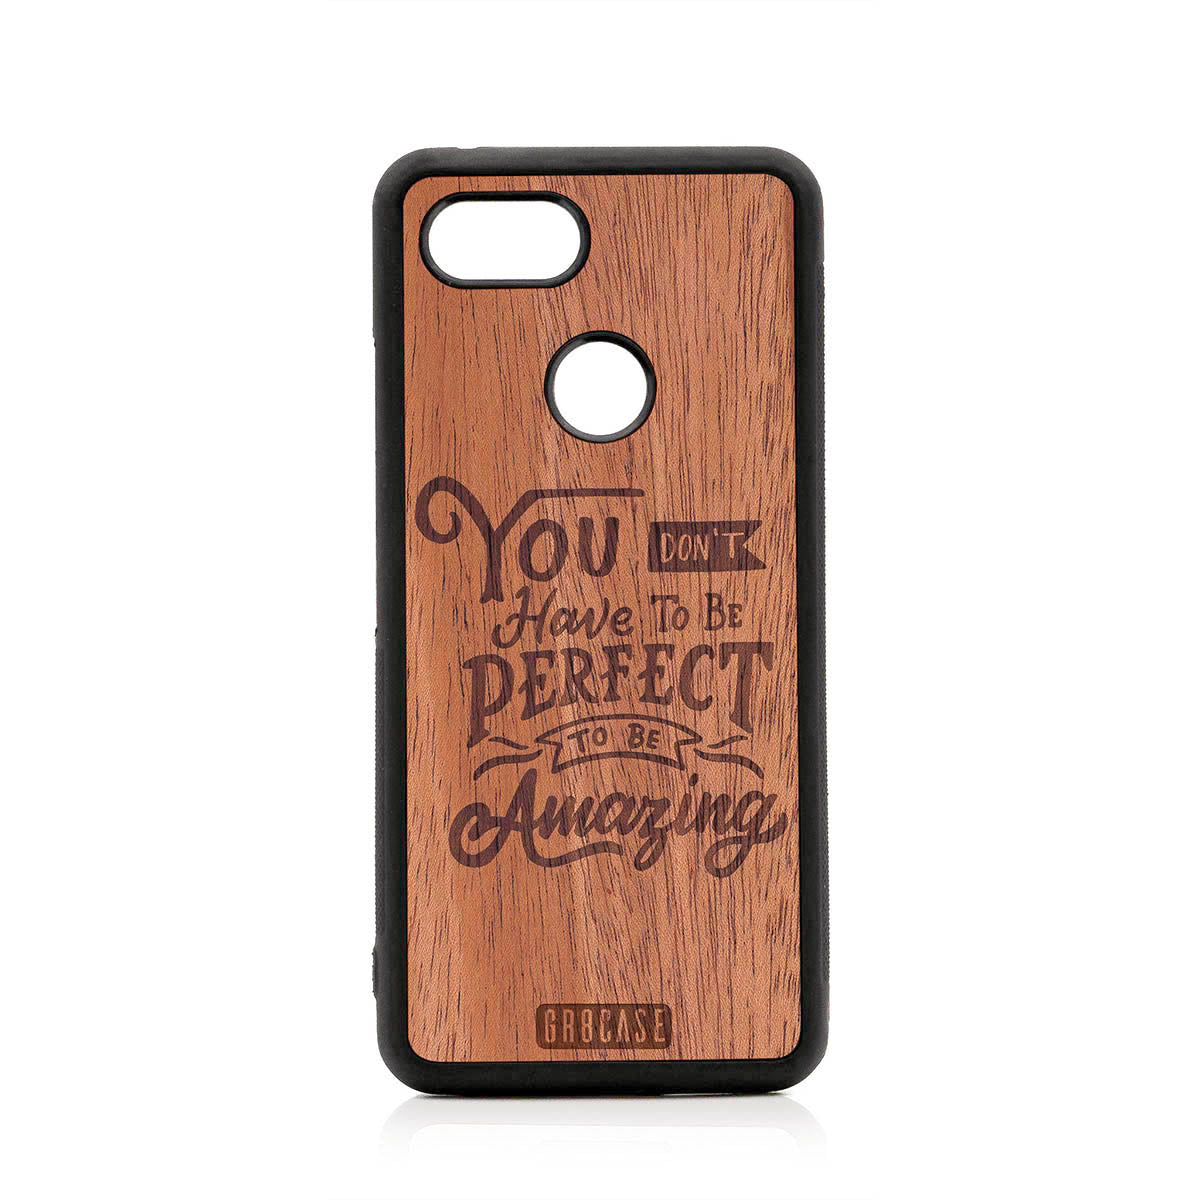 You Don't Have To Be Perfect To Be Amazing Design Wood Case For Google Pixel 3